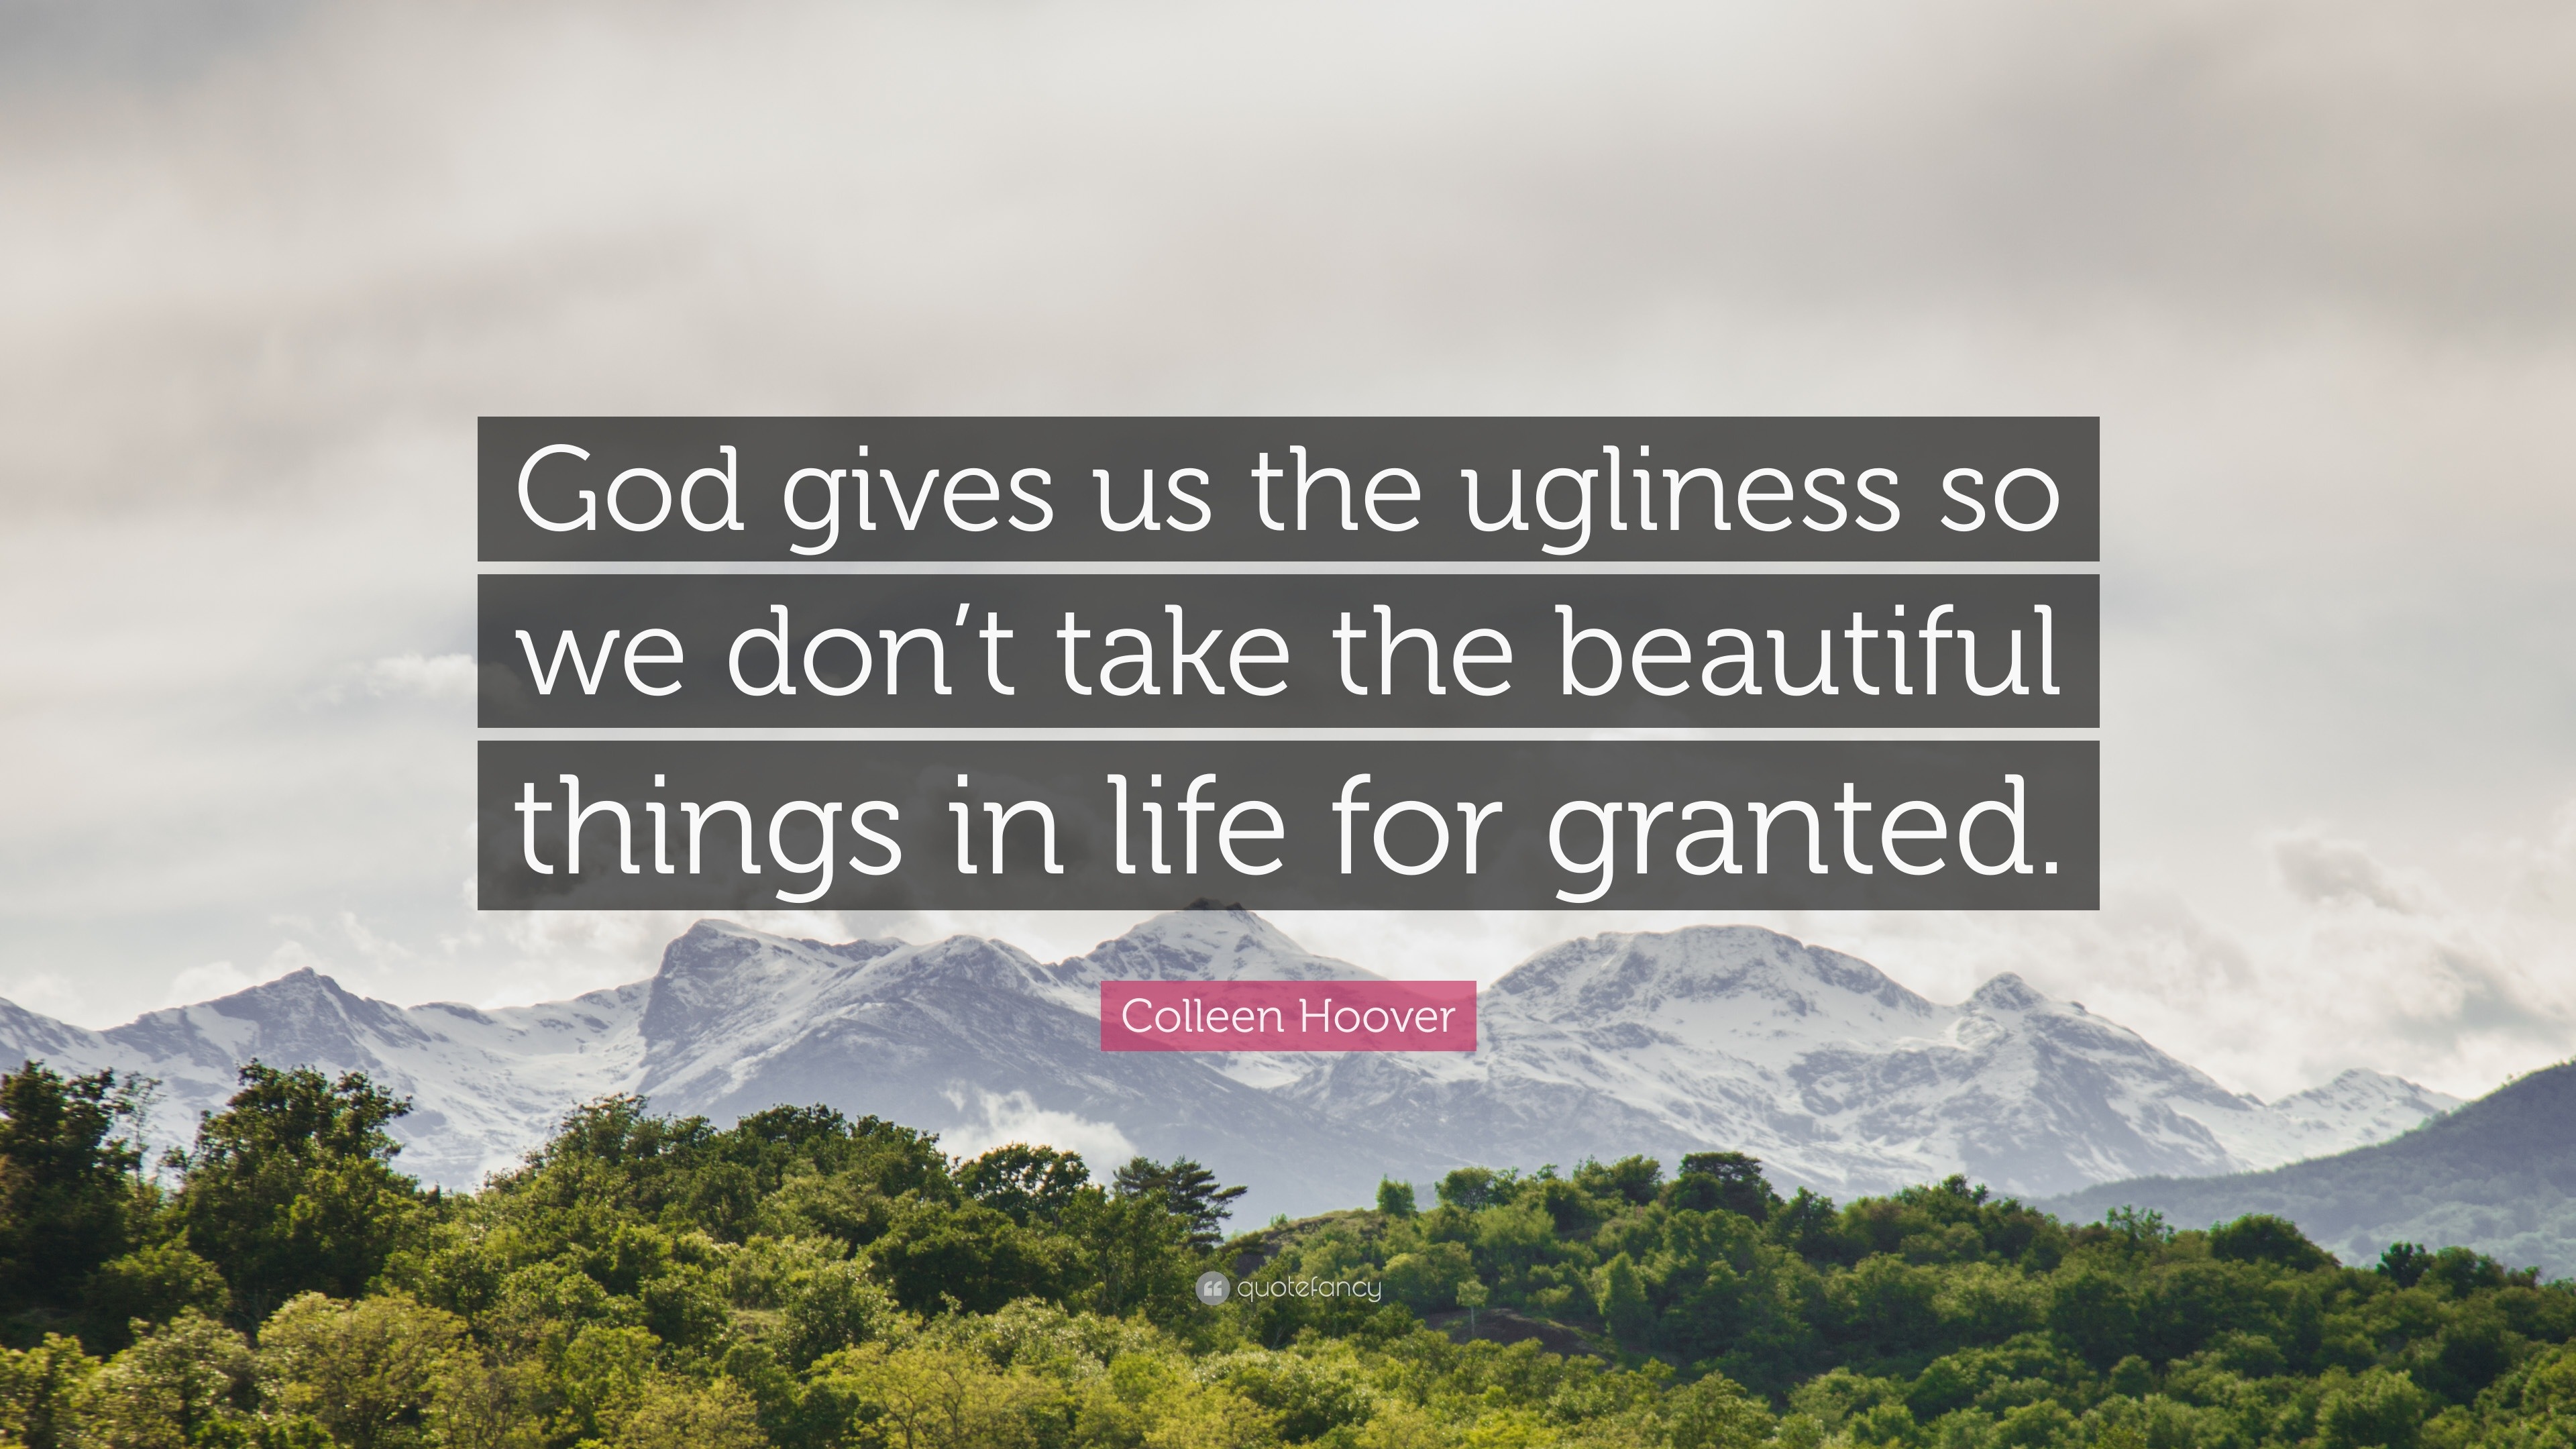 Colleen Hoover Quote “God gives us the ugliness so we don t take